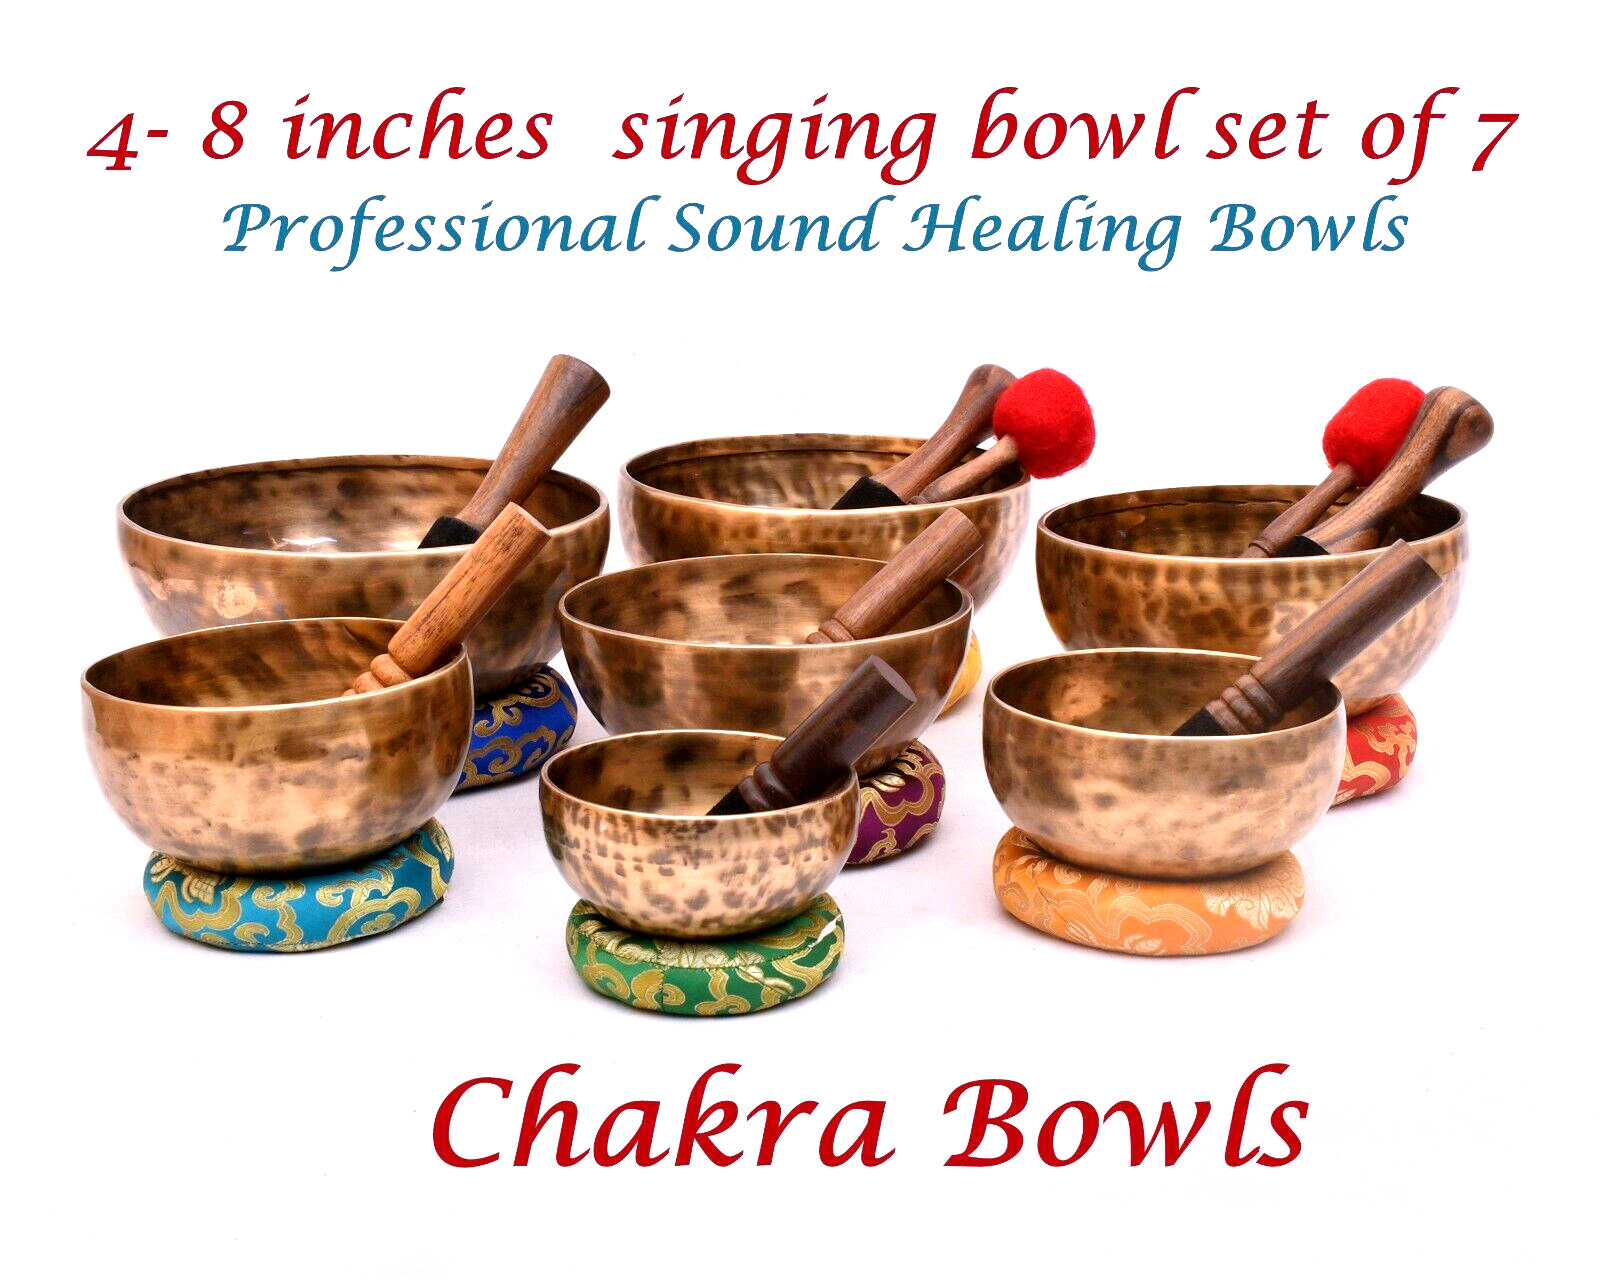 4-8 inches Chakra frequency tuned singing bowl set of 7 - Tibetan Singing bowls